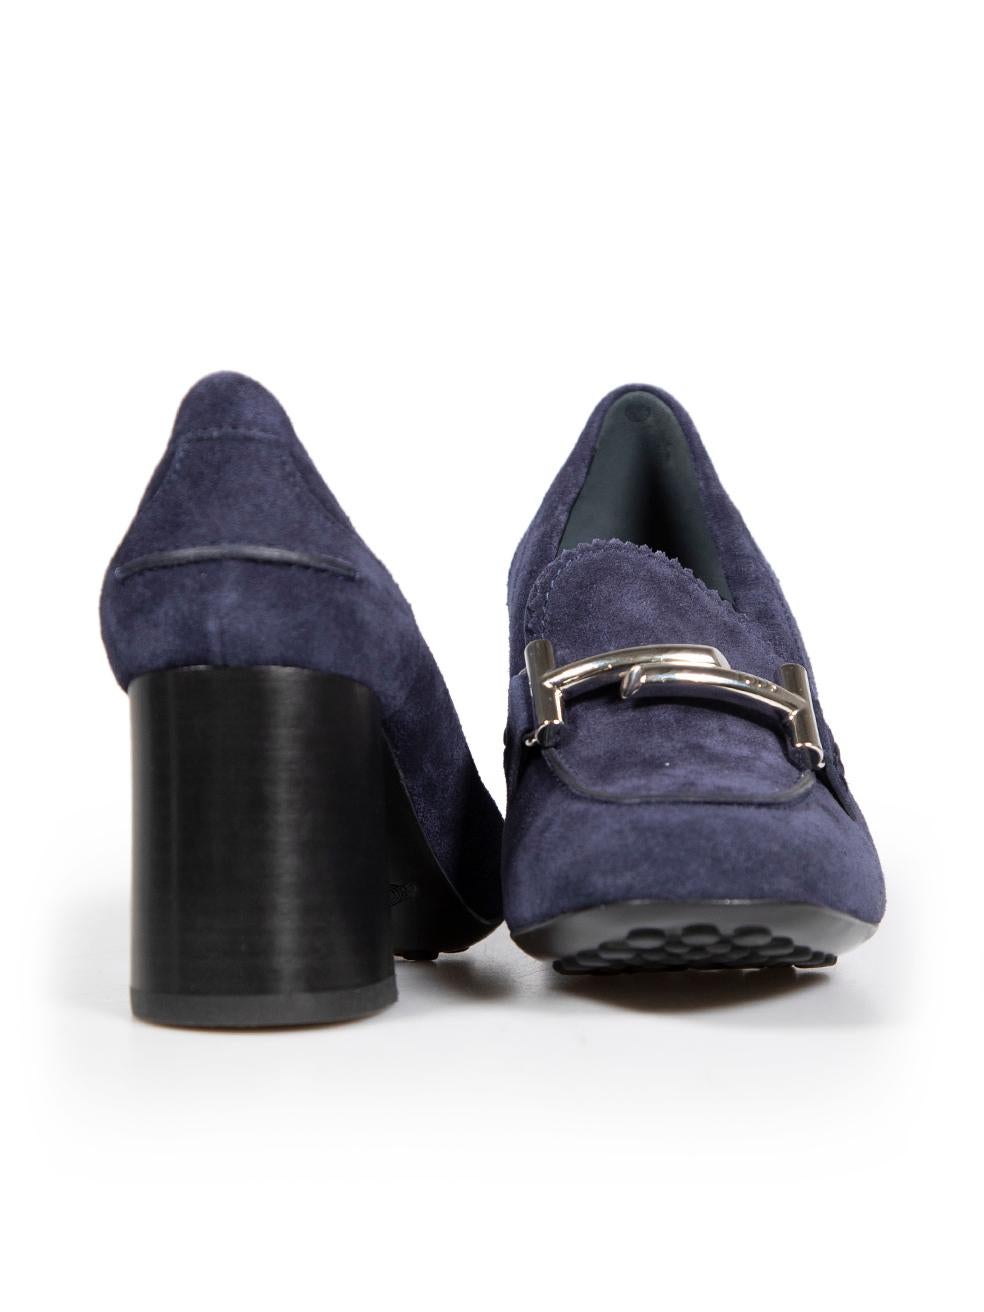 Tod's Navy Suede Double T Buckle Loafer Pumps Size IT 35.5 In New Condition For Sale In London, GB